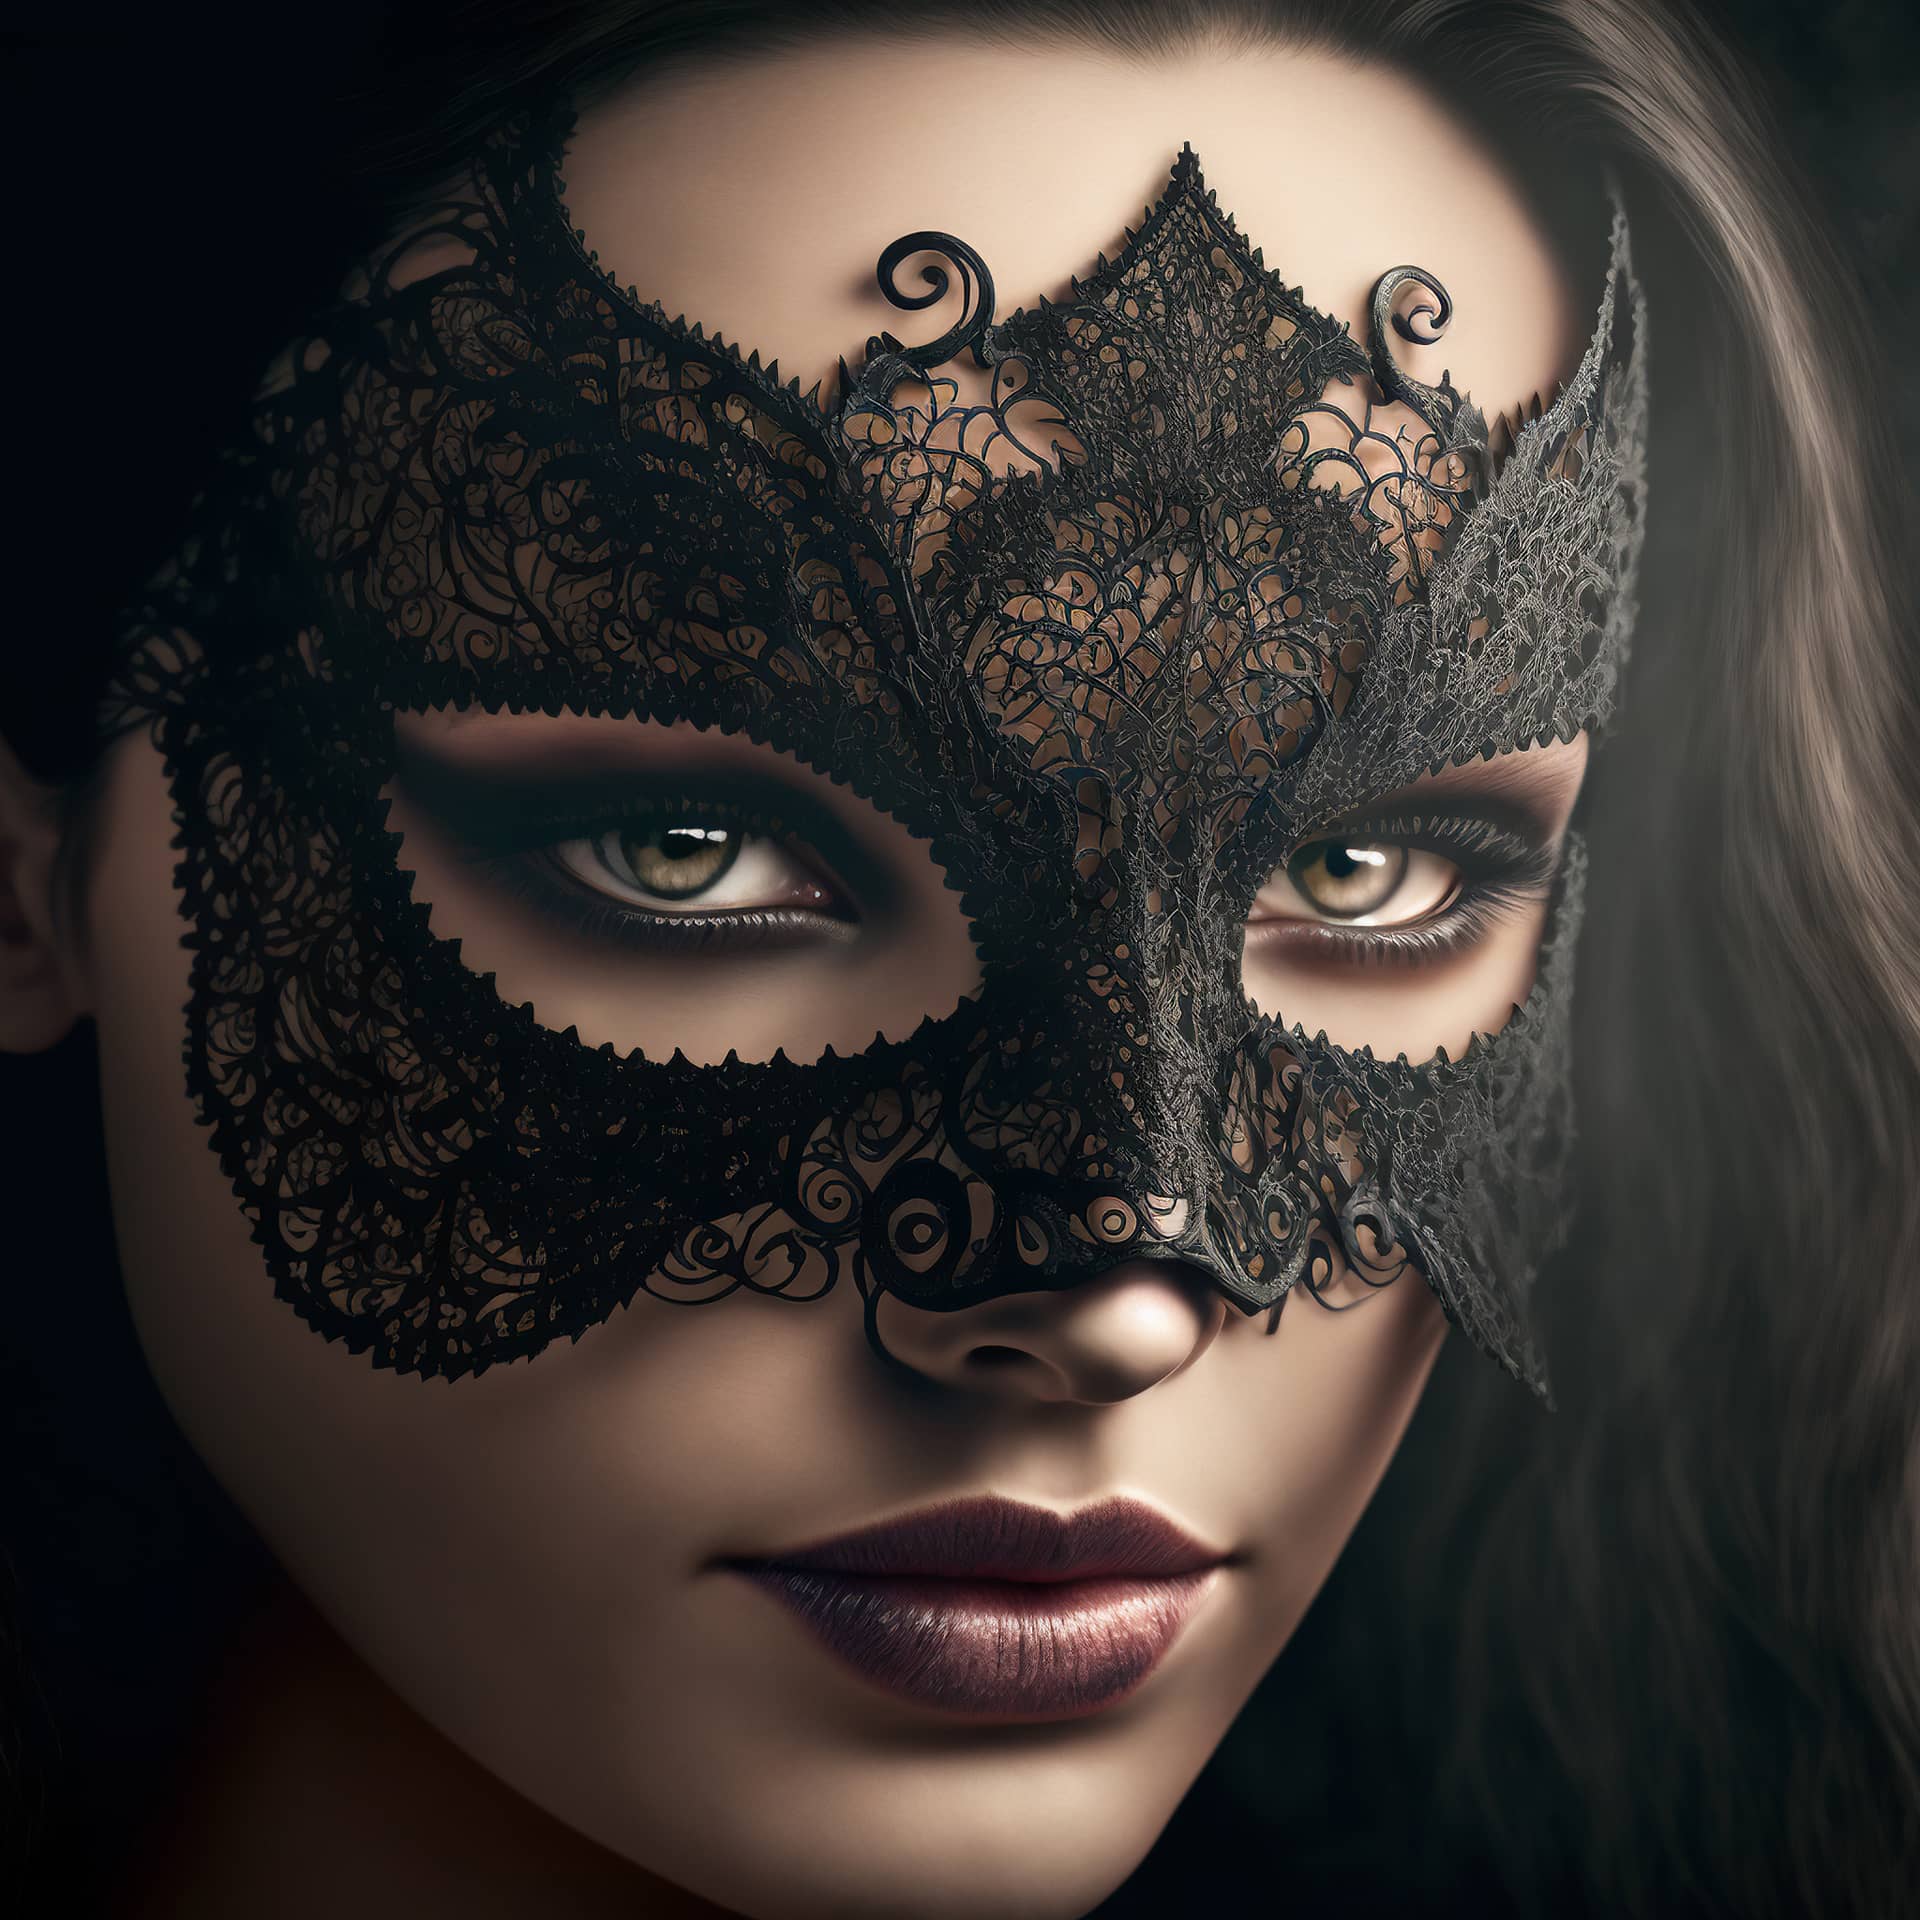 Expressive eyes oriental woman with black lace mask her eyes good profile pics